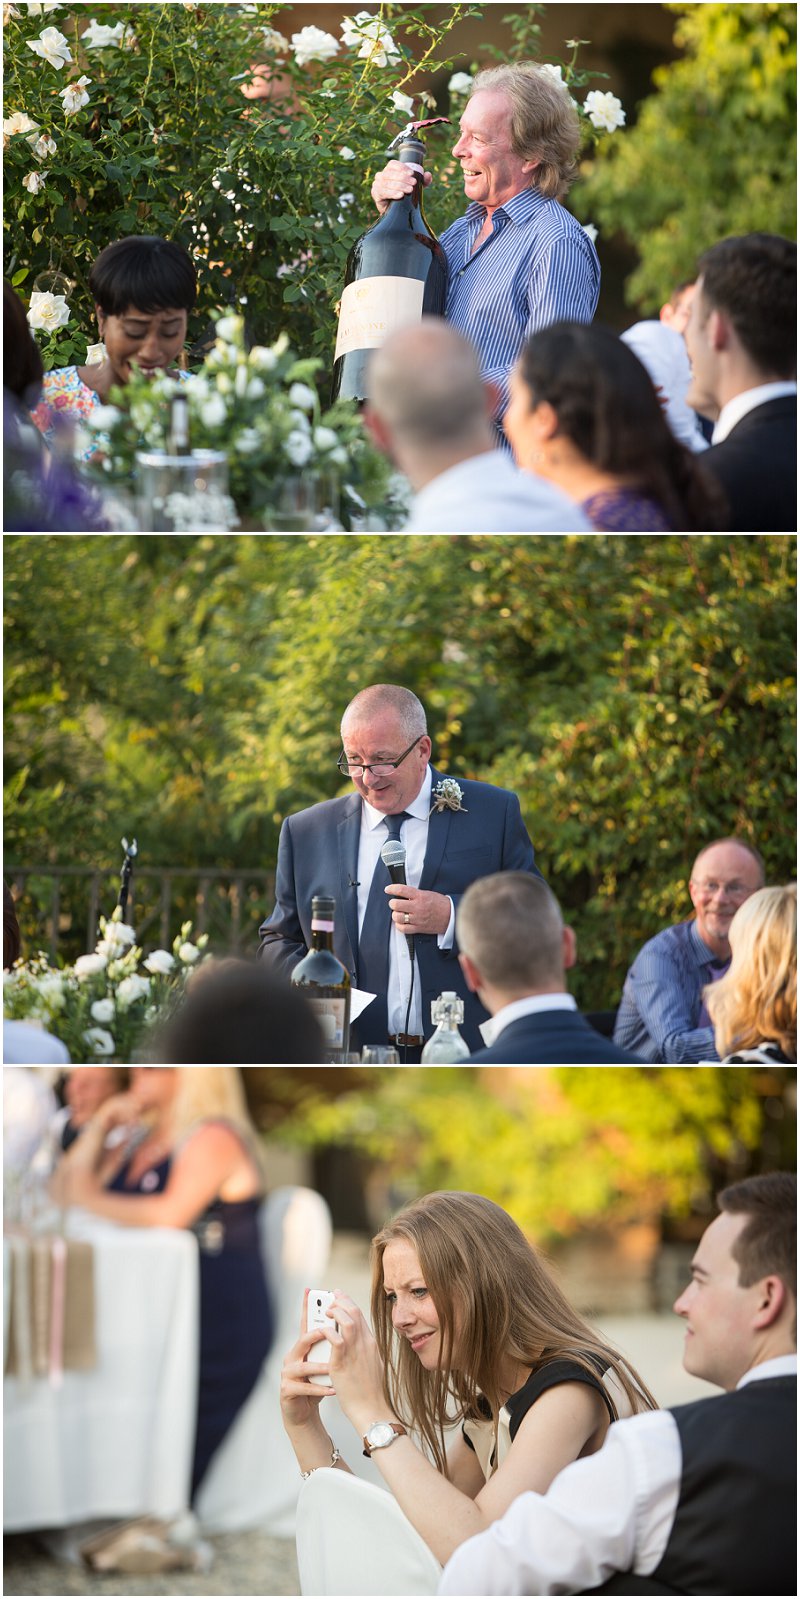 Father of the bride's speech during wedding ceremony in Italy